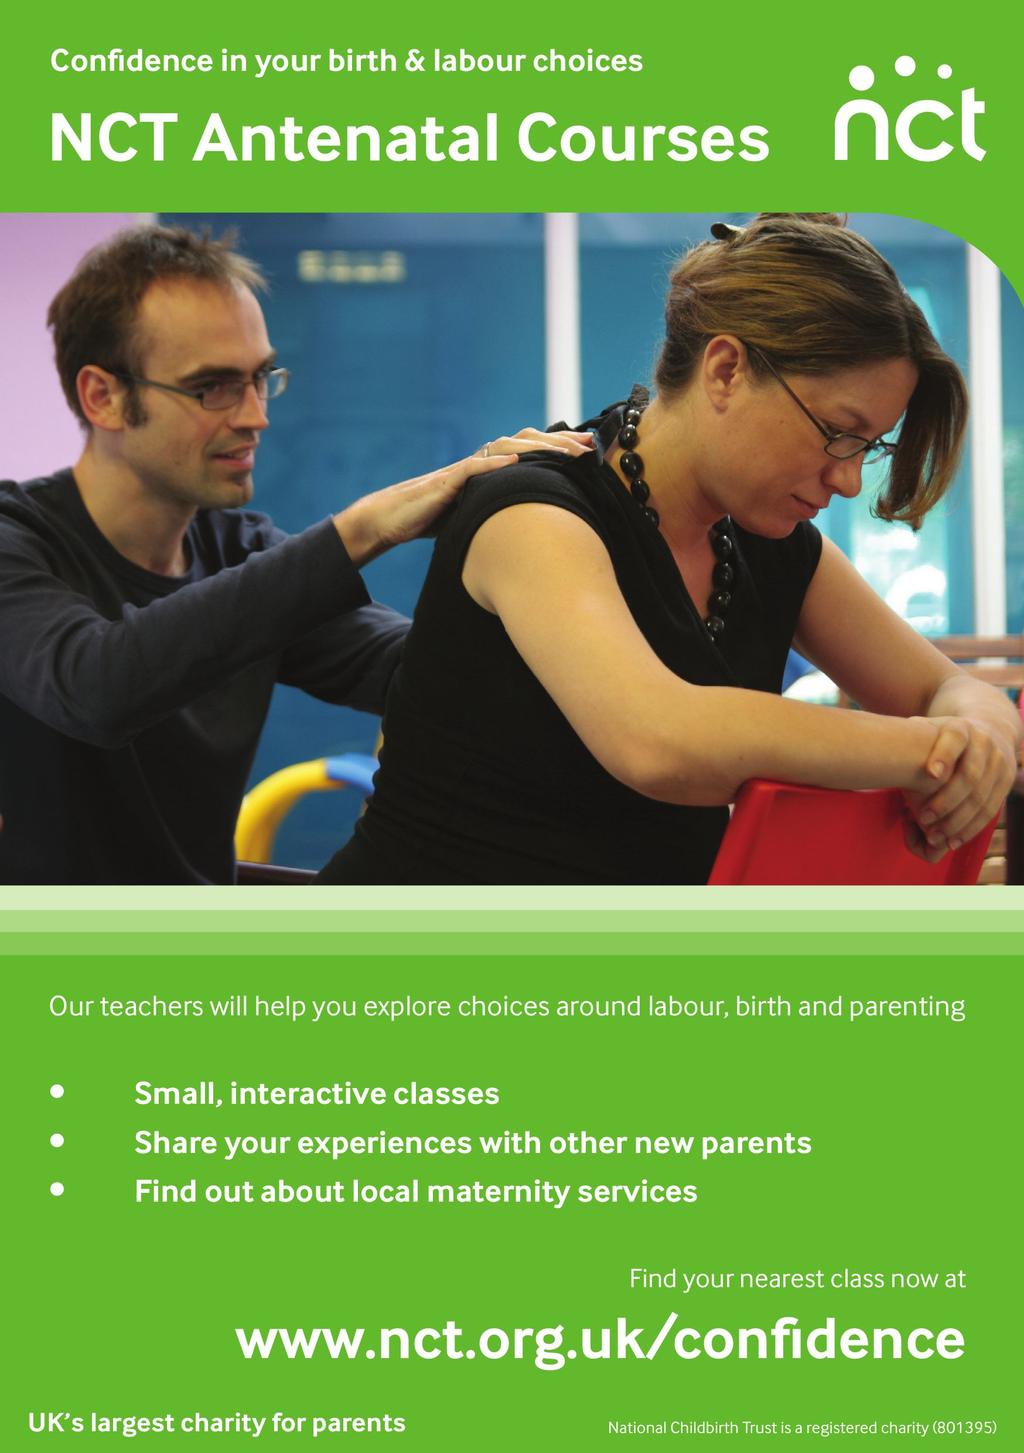 Antenatal Courses Local weekend courses starting in 2012 -